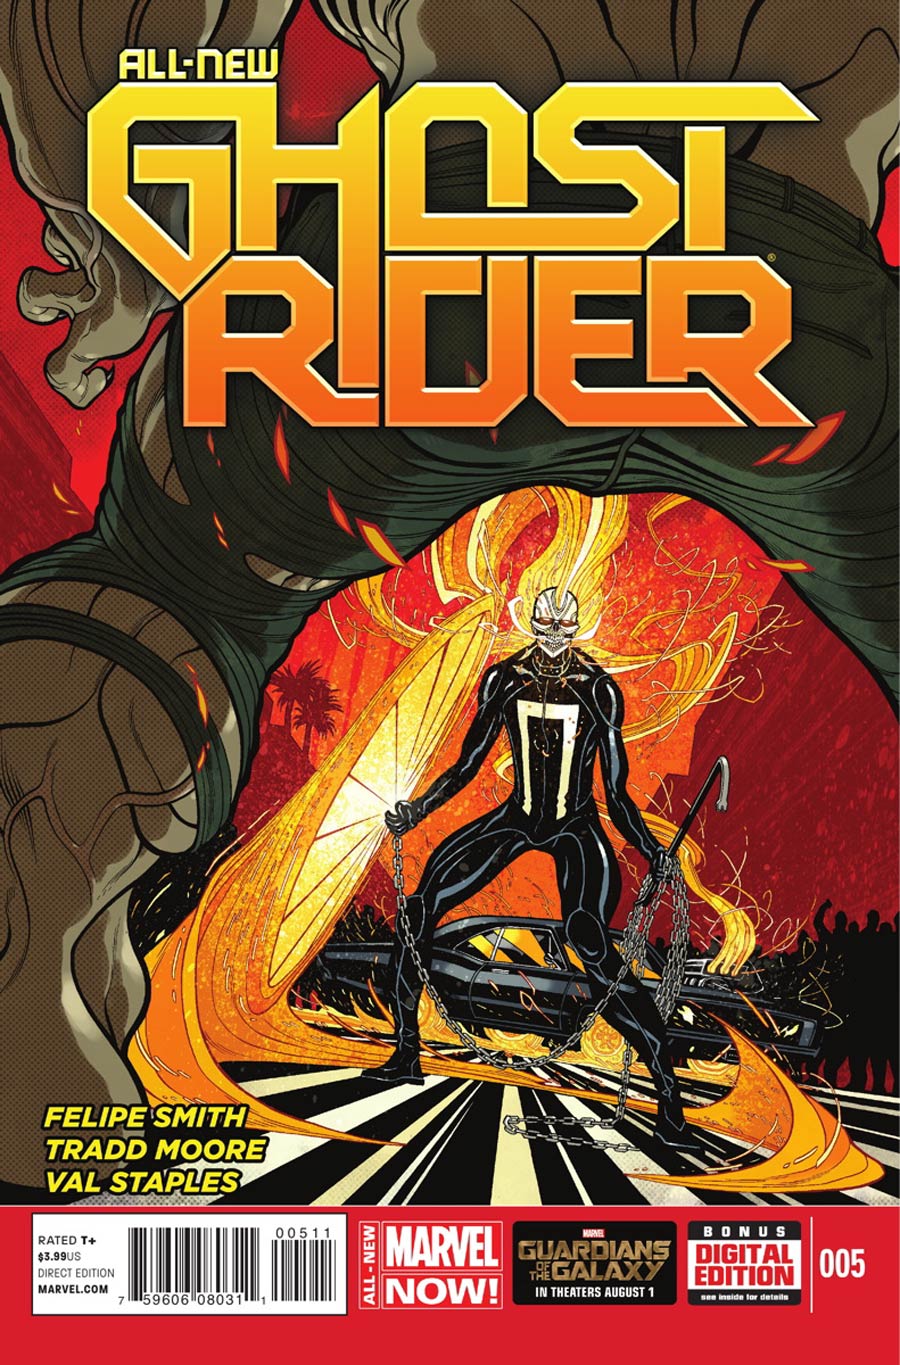 All-New Ghost Rider #5